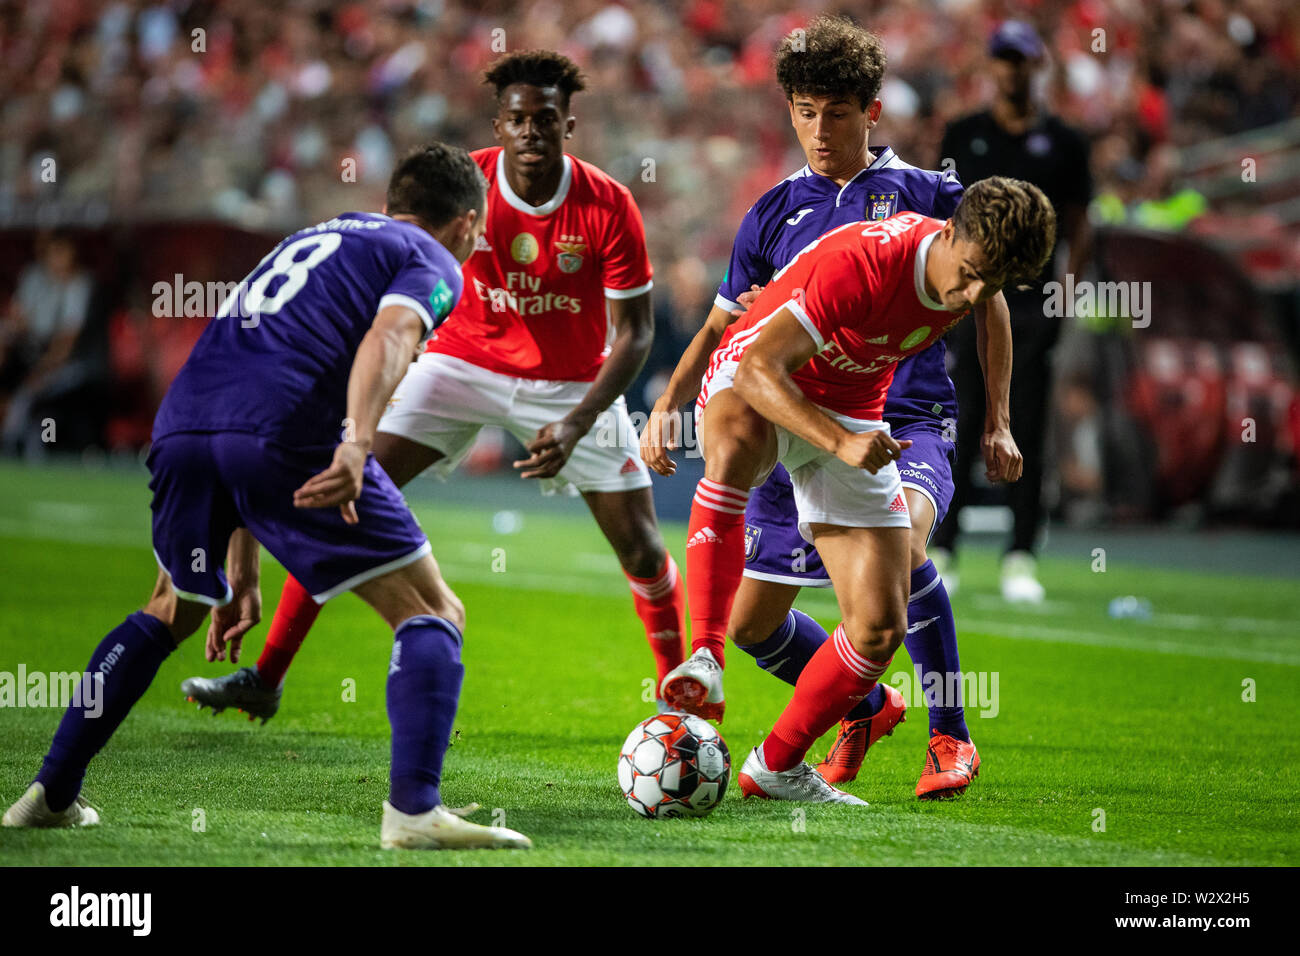 Lisbon, Portugal. 10th July, 2019. Tiago Dantas of SL Benfica vies for the ball with Théo Leoni of RSC Anderlecht during the Pre-Season football match 2019/2020 between SL Benfica vs Royal Sporting Club Anderlecht.(Final score: SL Benfica 1 - 2 Royal Sporting Club Anderlecht) Credit: SOPA Images Limited/Alamy Live News Stock Photo